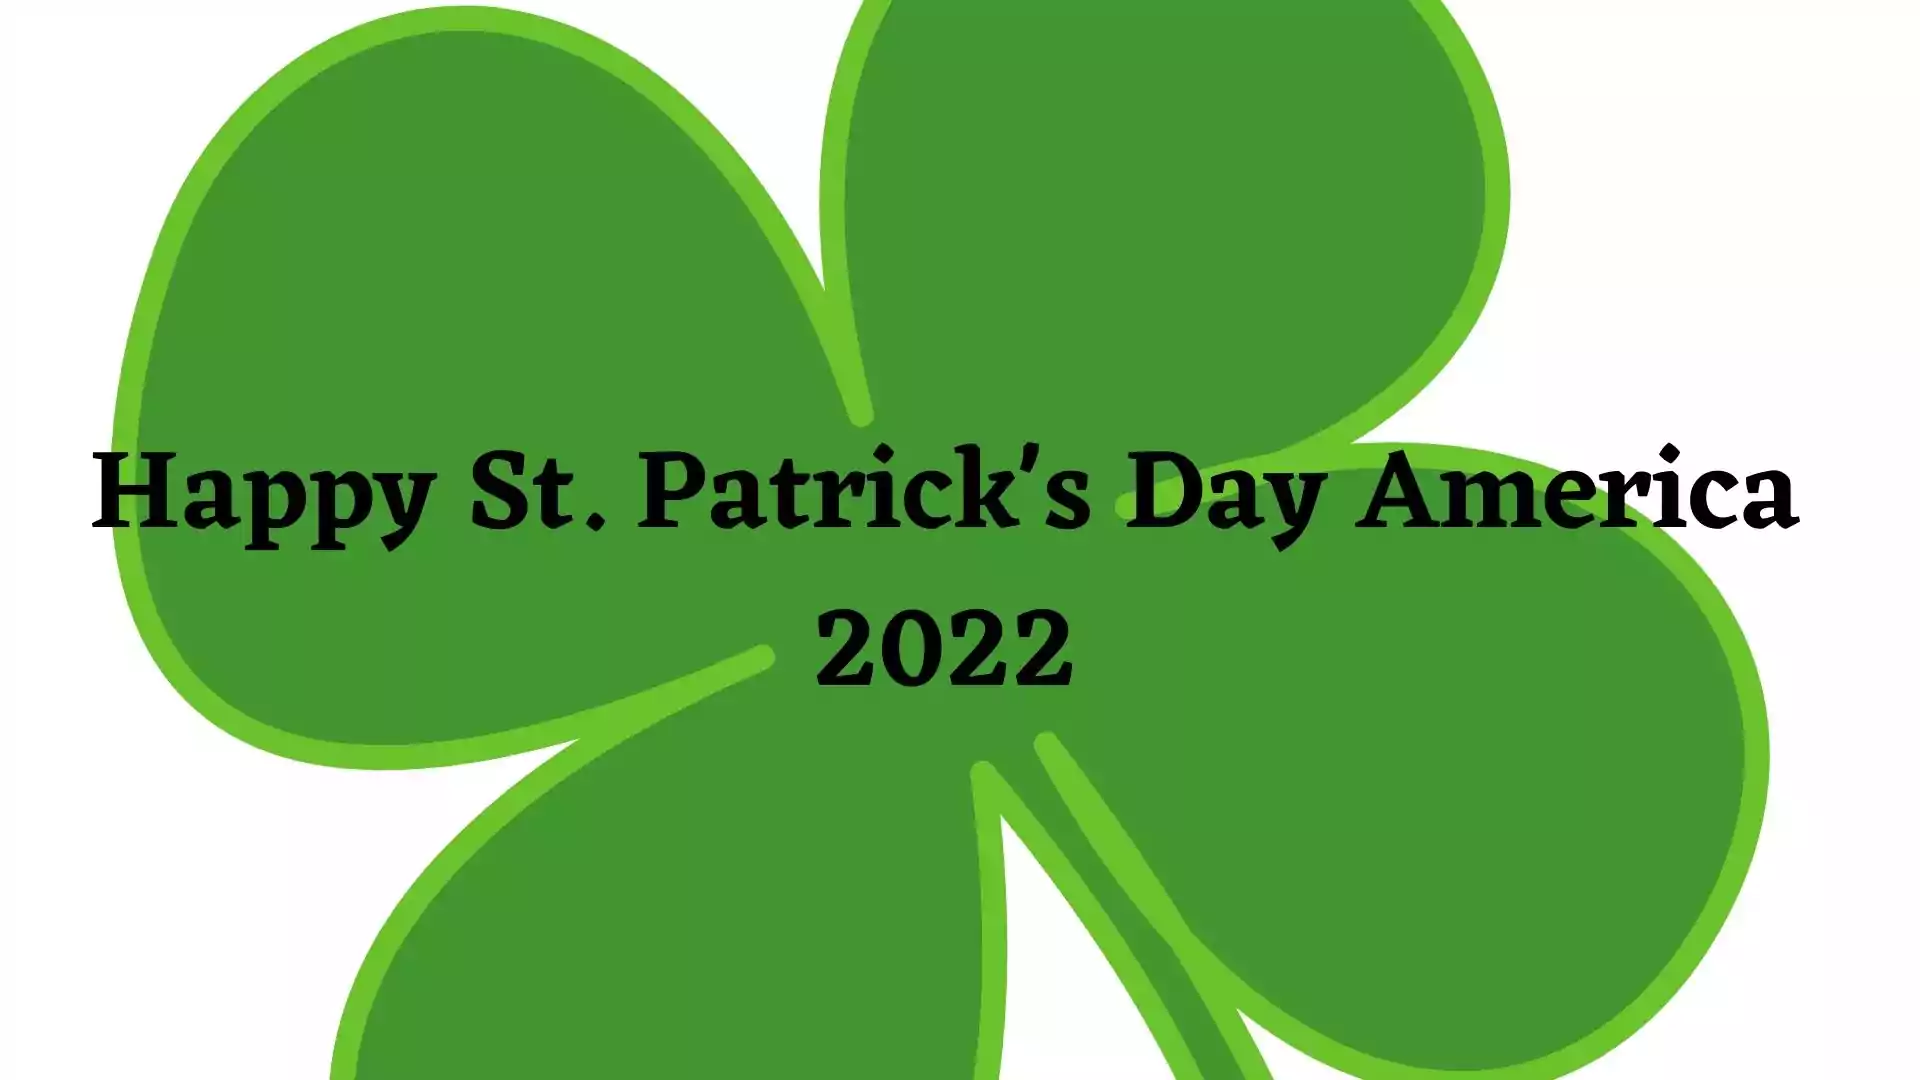 Happy St. Patrick's Day America 2022 wallpaper and images